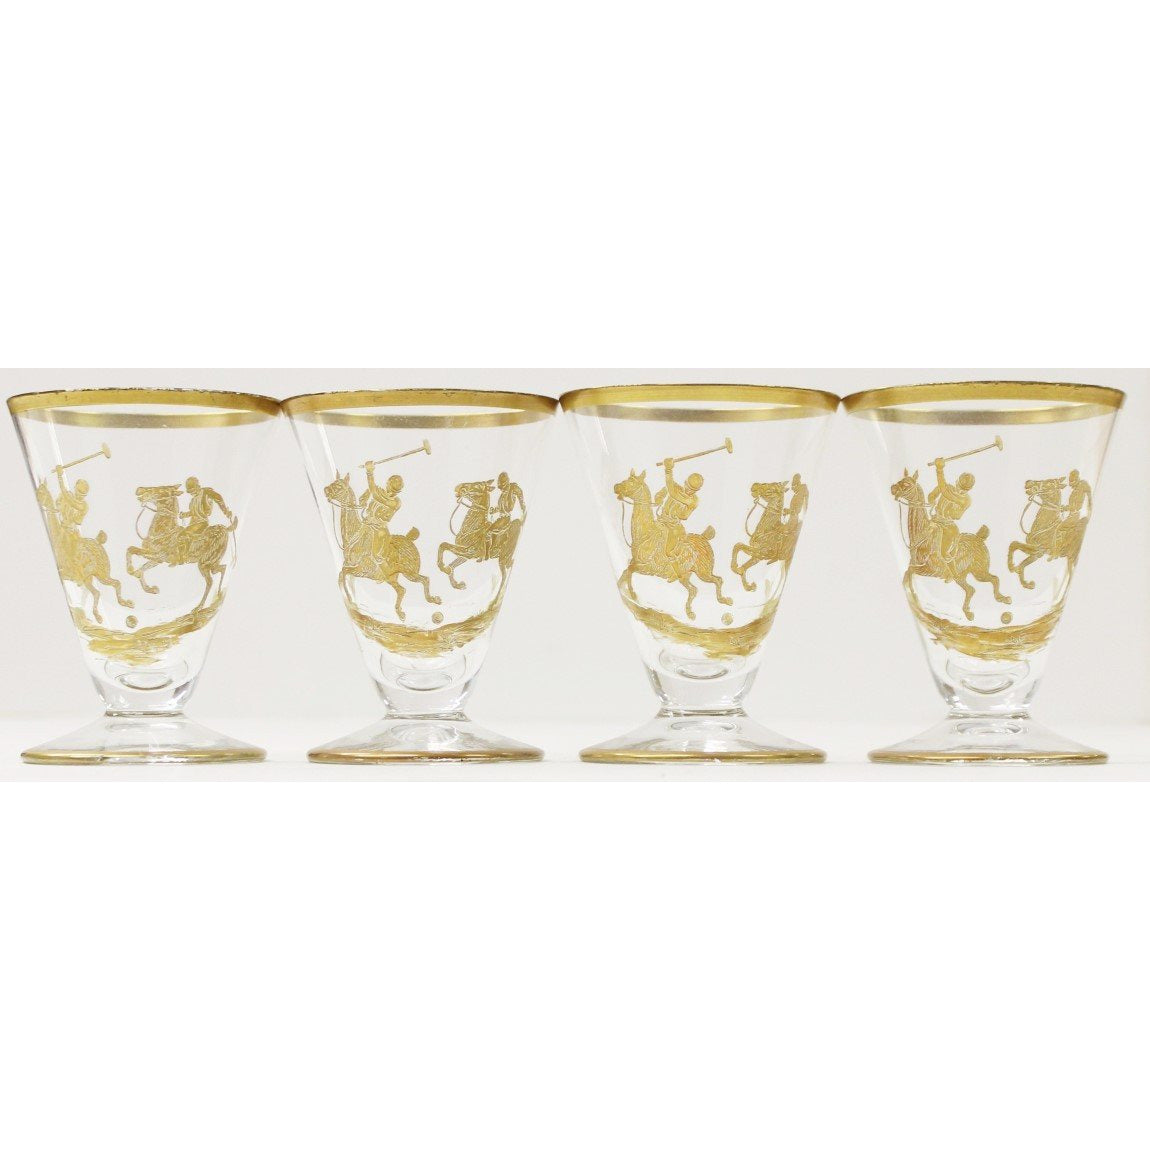 Set of 4 Gold Polo Player Sherry Glasses